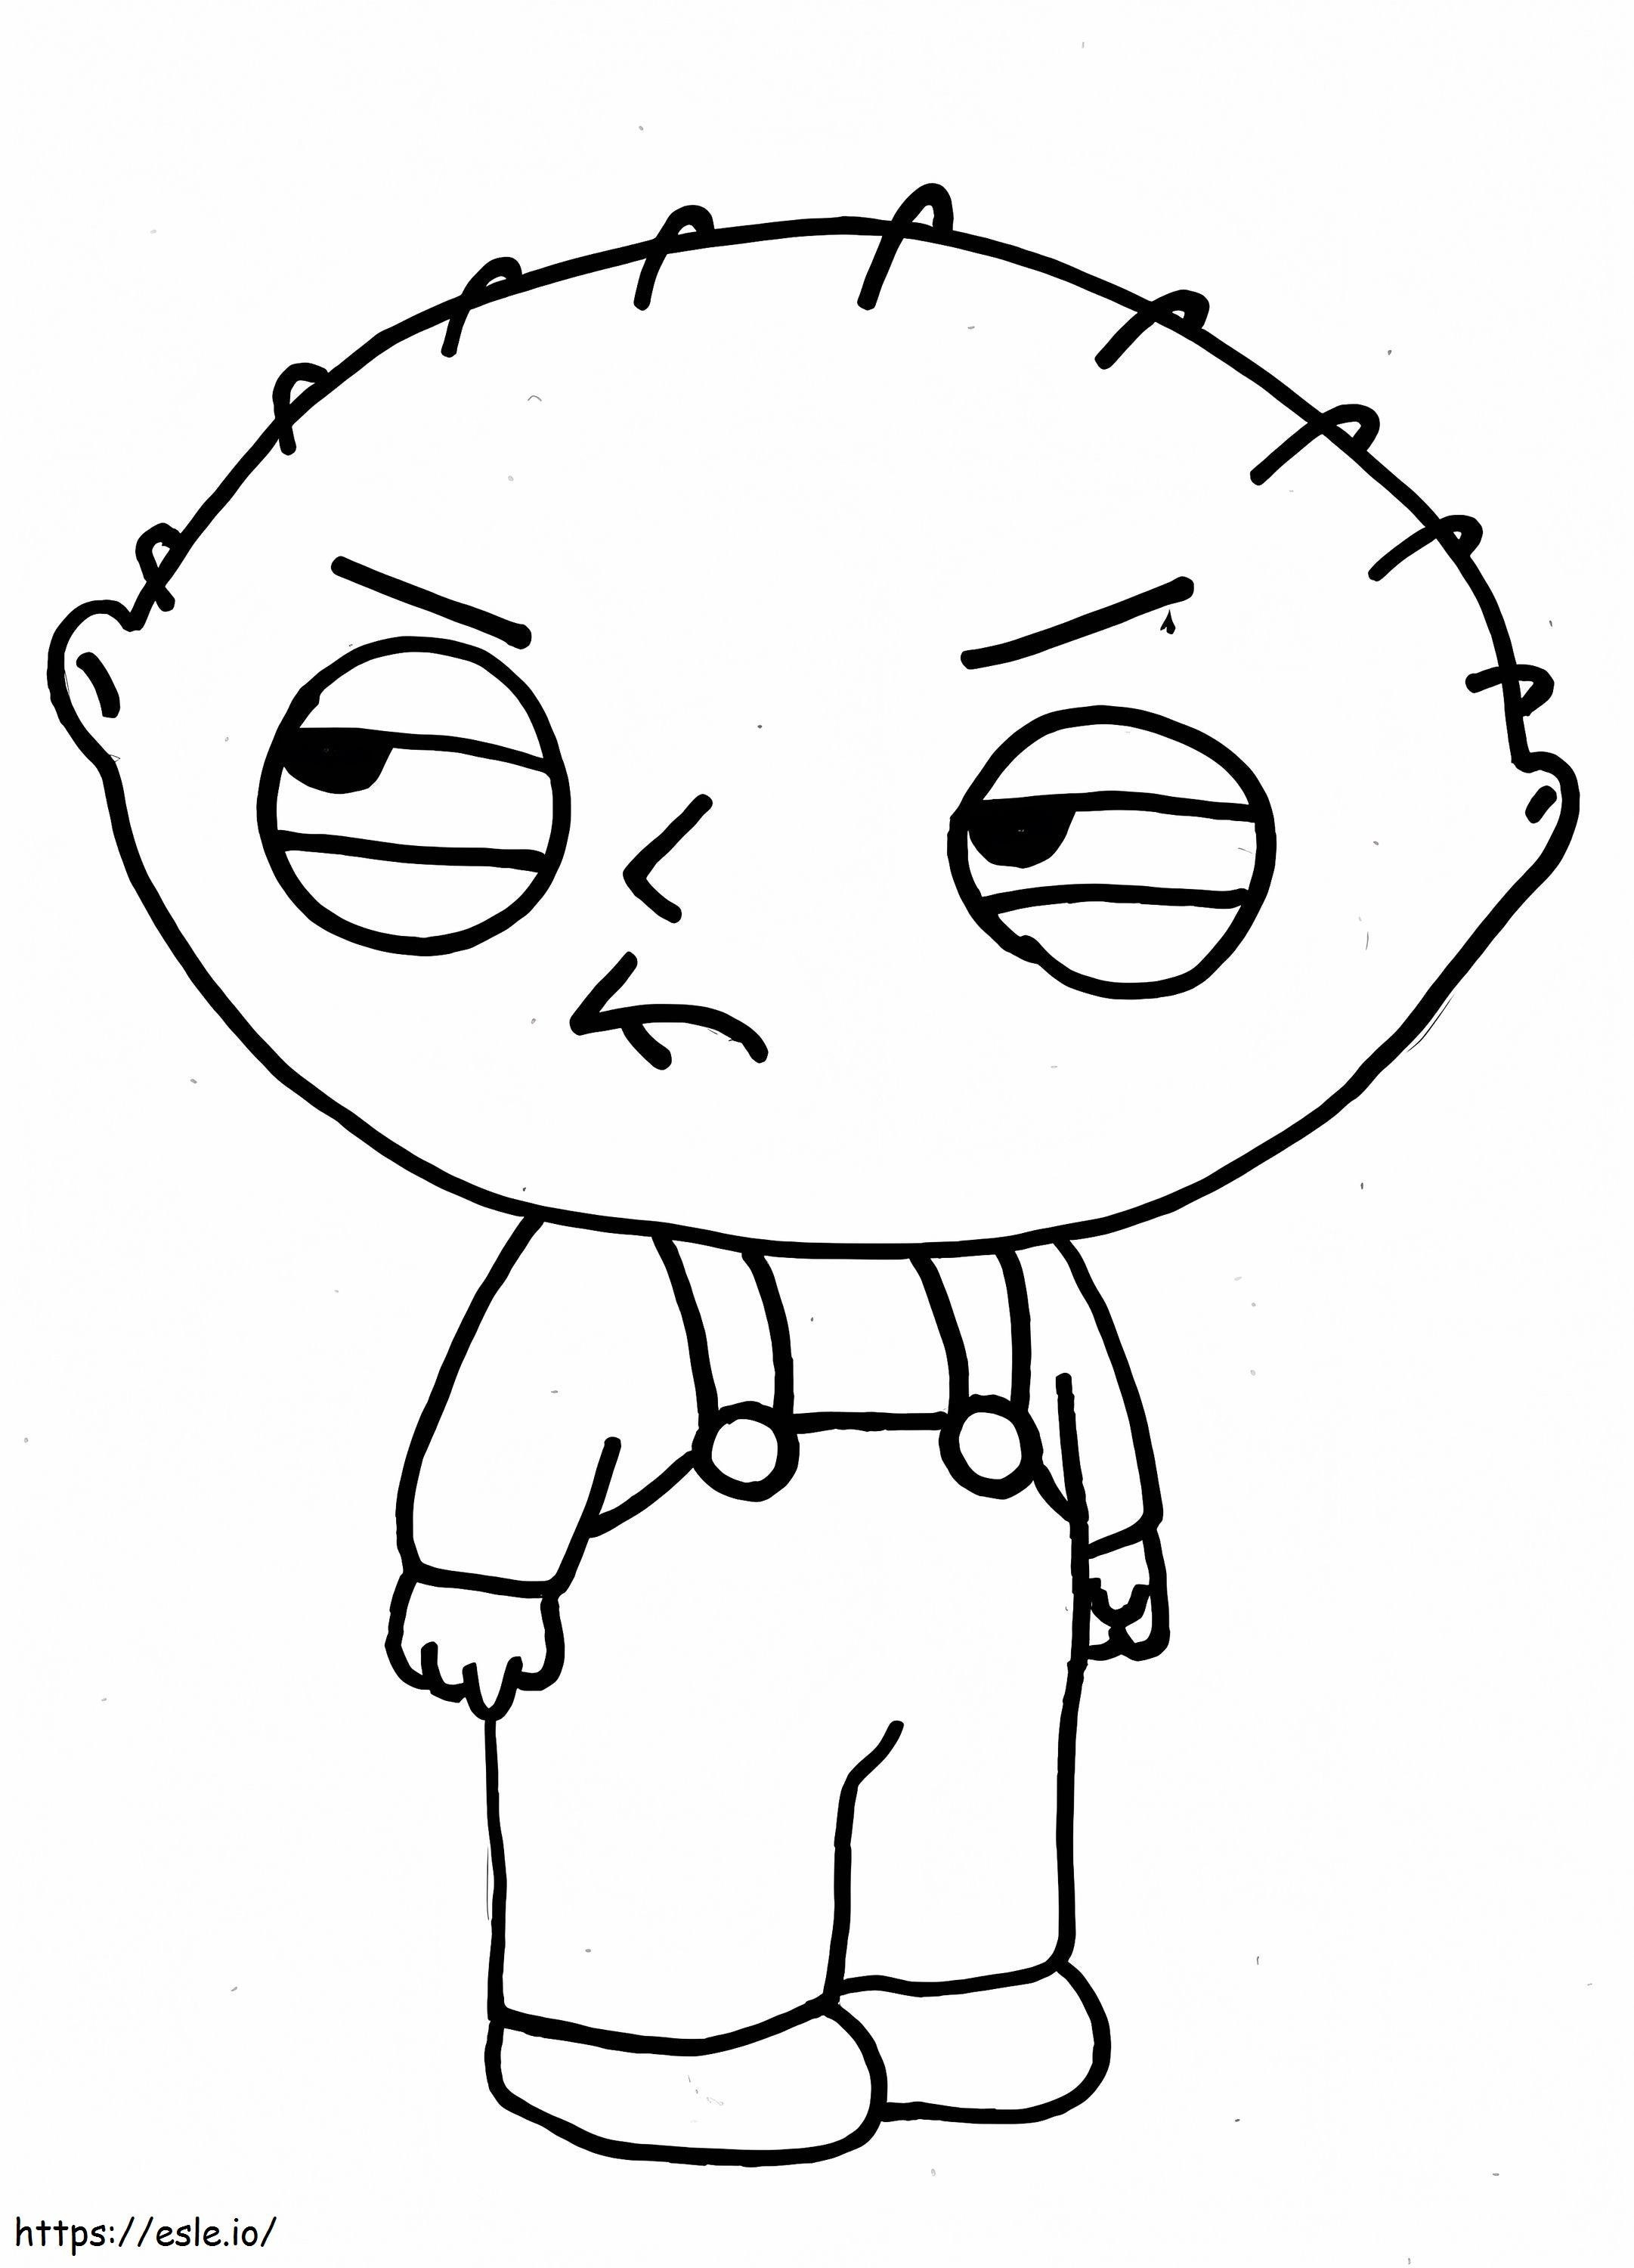 Stewie Griffin 3 coloring page